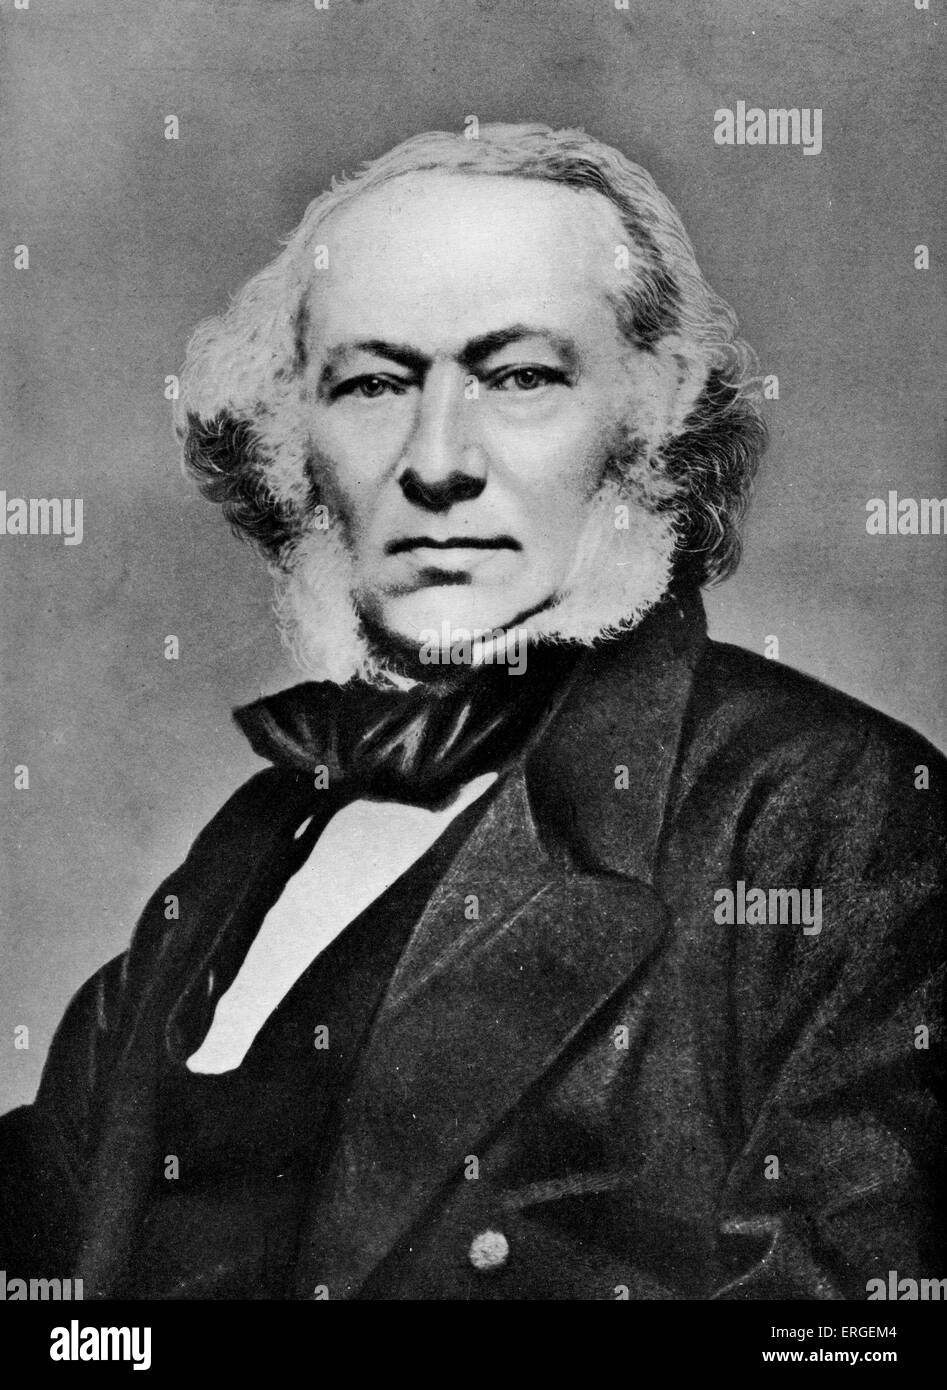 Richard Cobden - portrait. British manufacturer and Radical and Liberal statesman, associated with formation of Anti - Corn Law Stock Photo